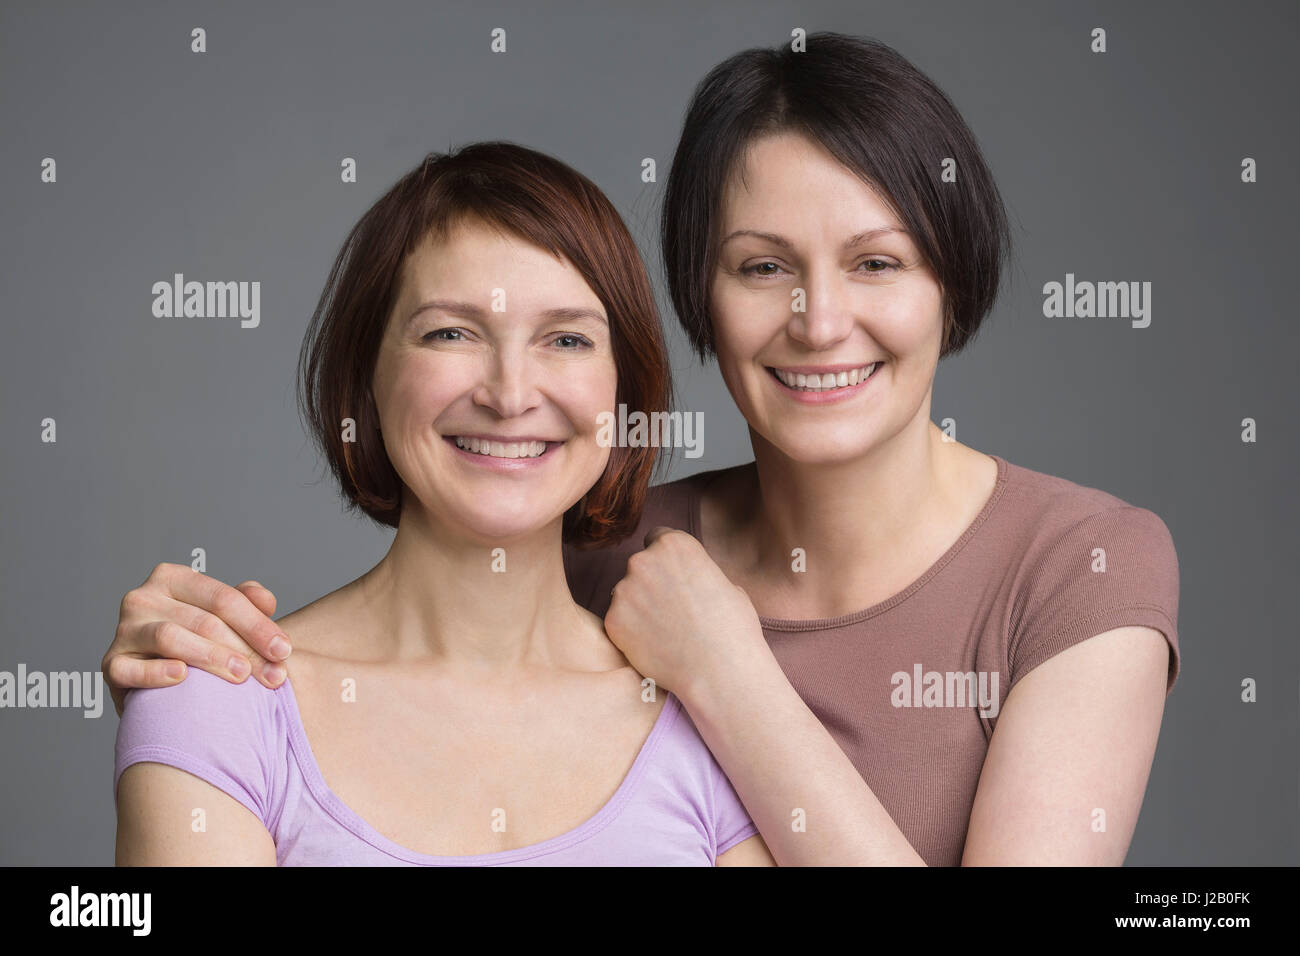 Portrait of happy mature female friends against gray background Stock Photo